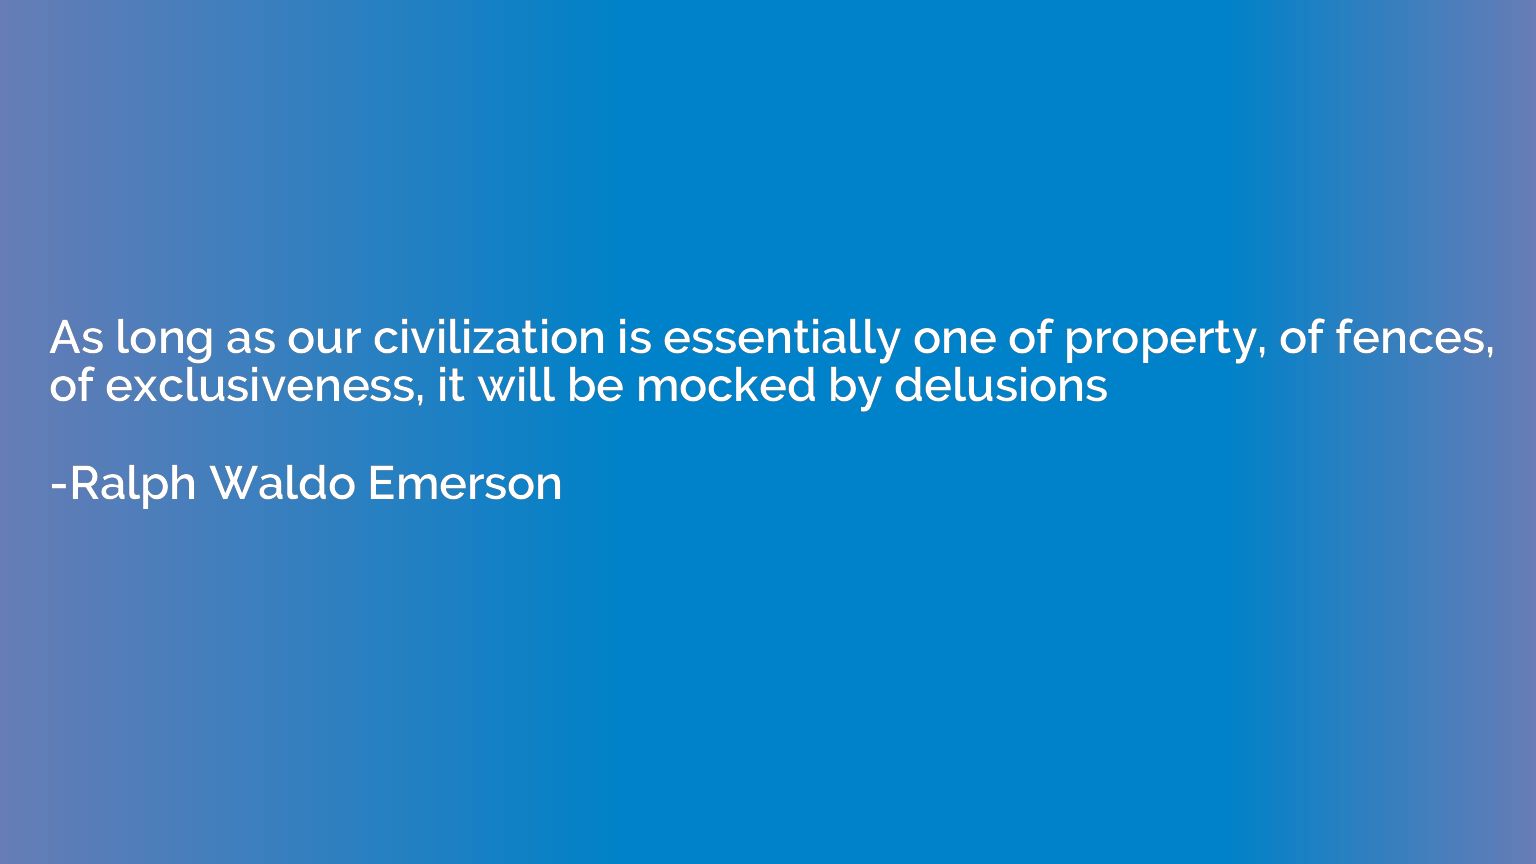 As long as our civilization is essentially one of property, 